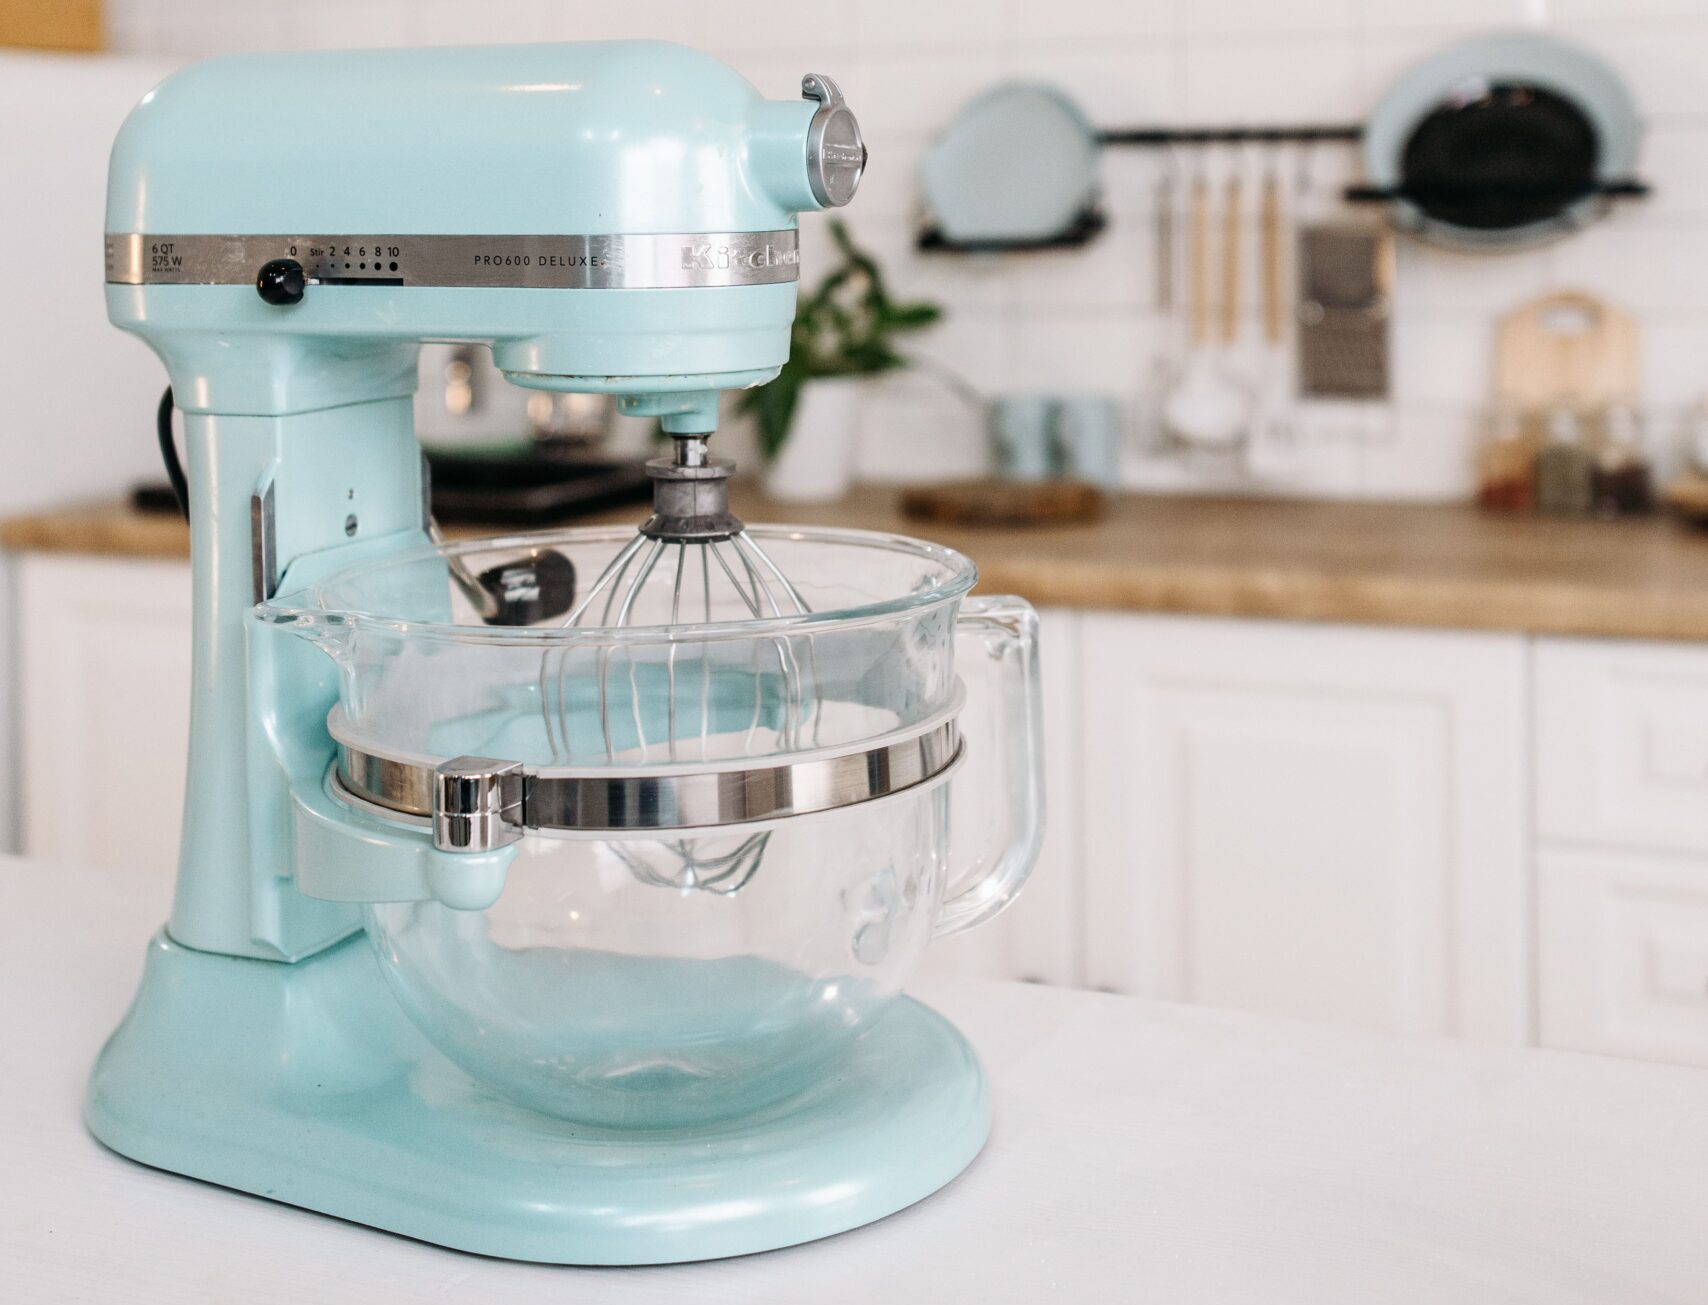 Why Is Oil Leaking from a KitchenAid Stand Mixer?